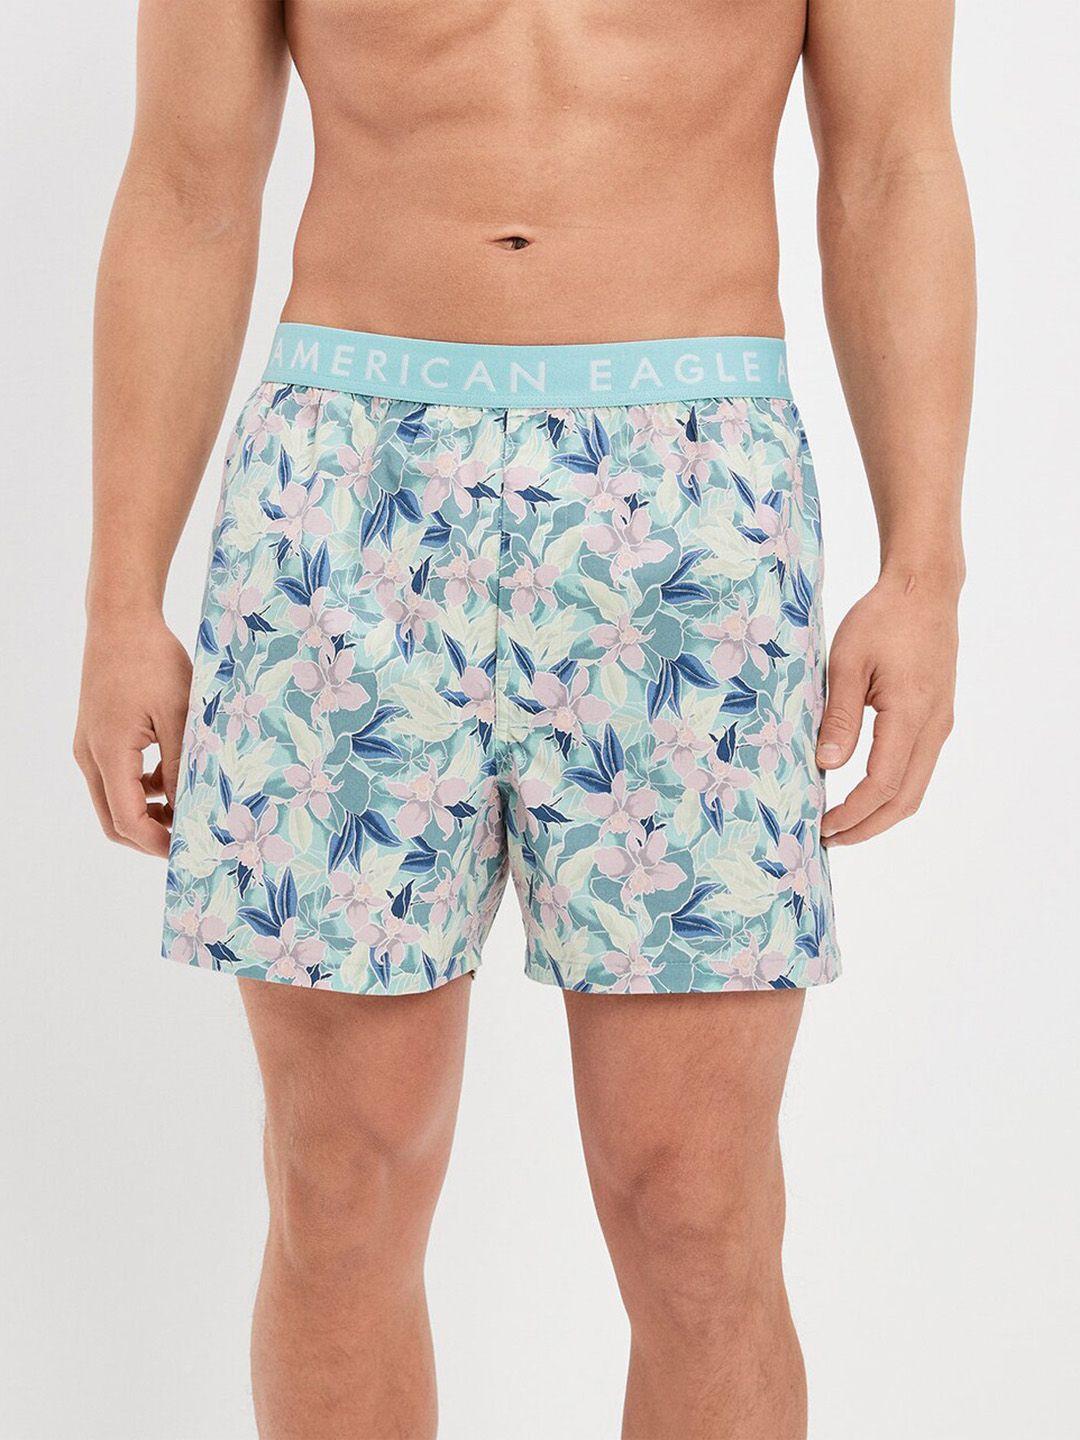 american eagle floral printed stretch anti-roll boxers wes0230080400